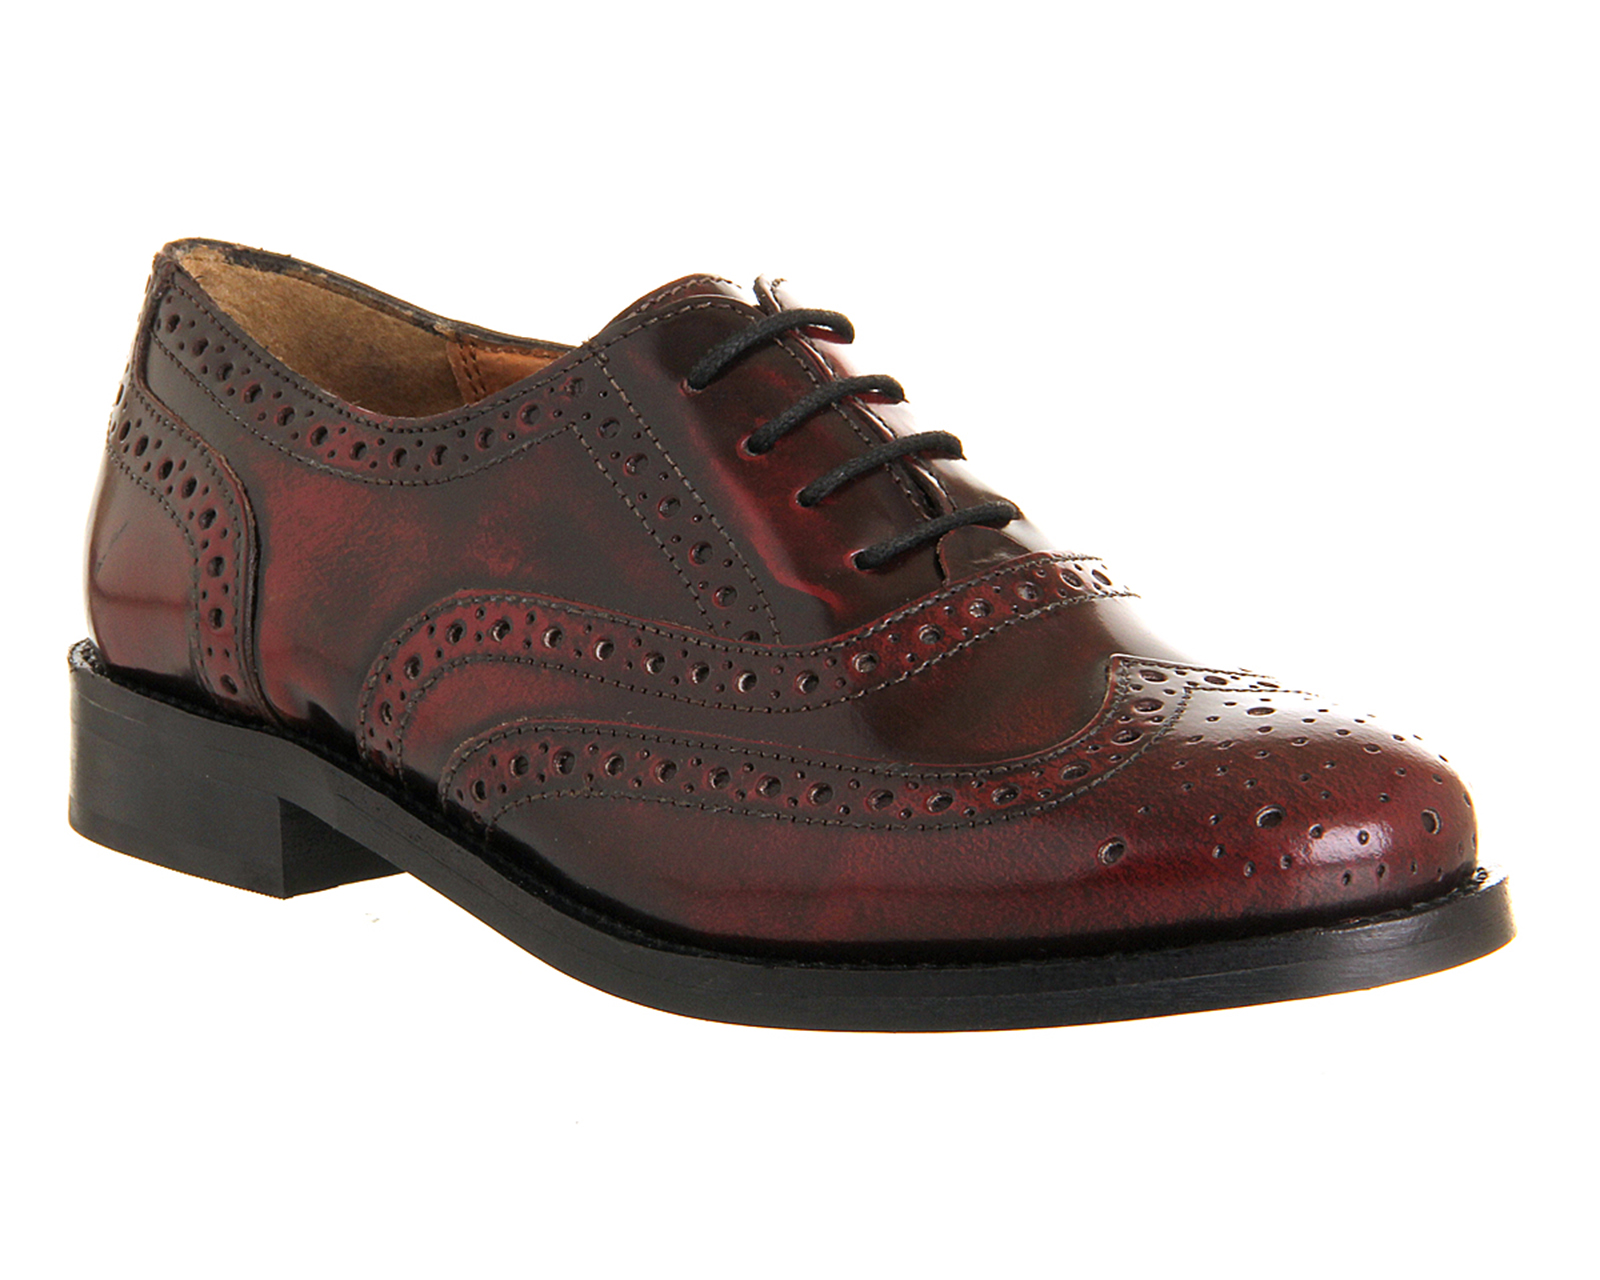 OFFICEVictory Brogue Lace UpBurgundy Box Leather